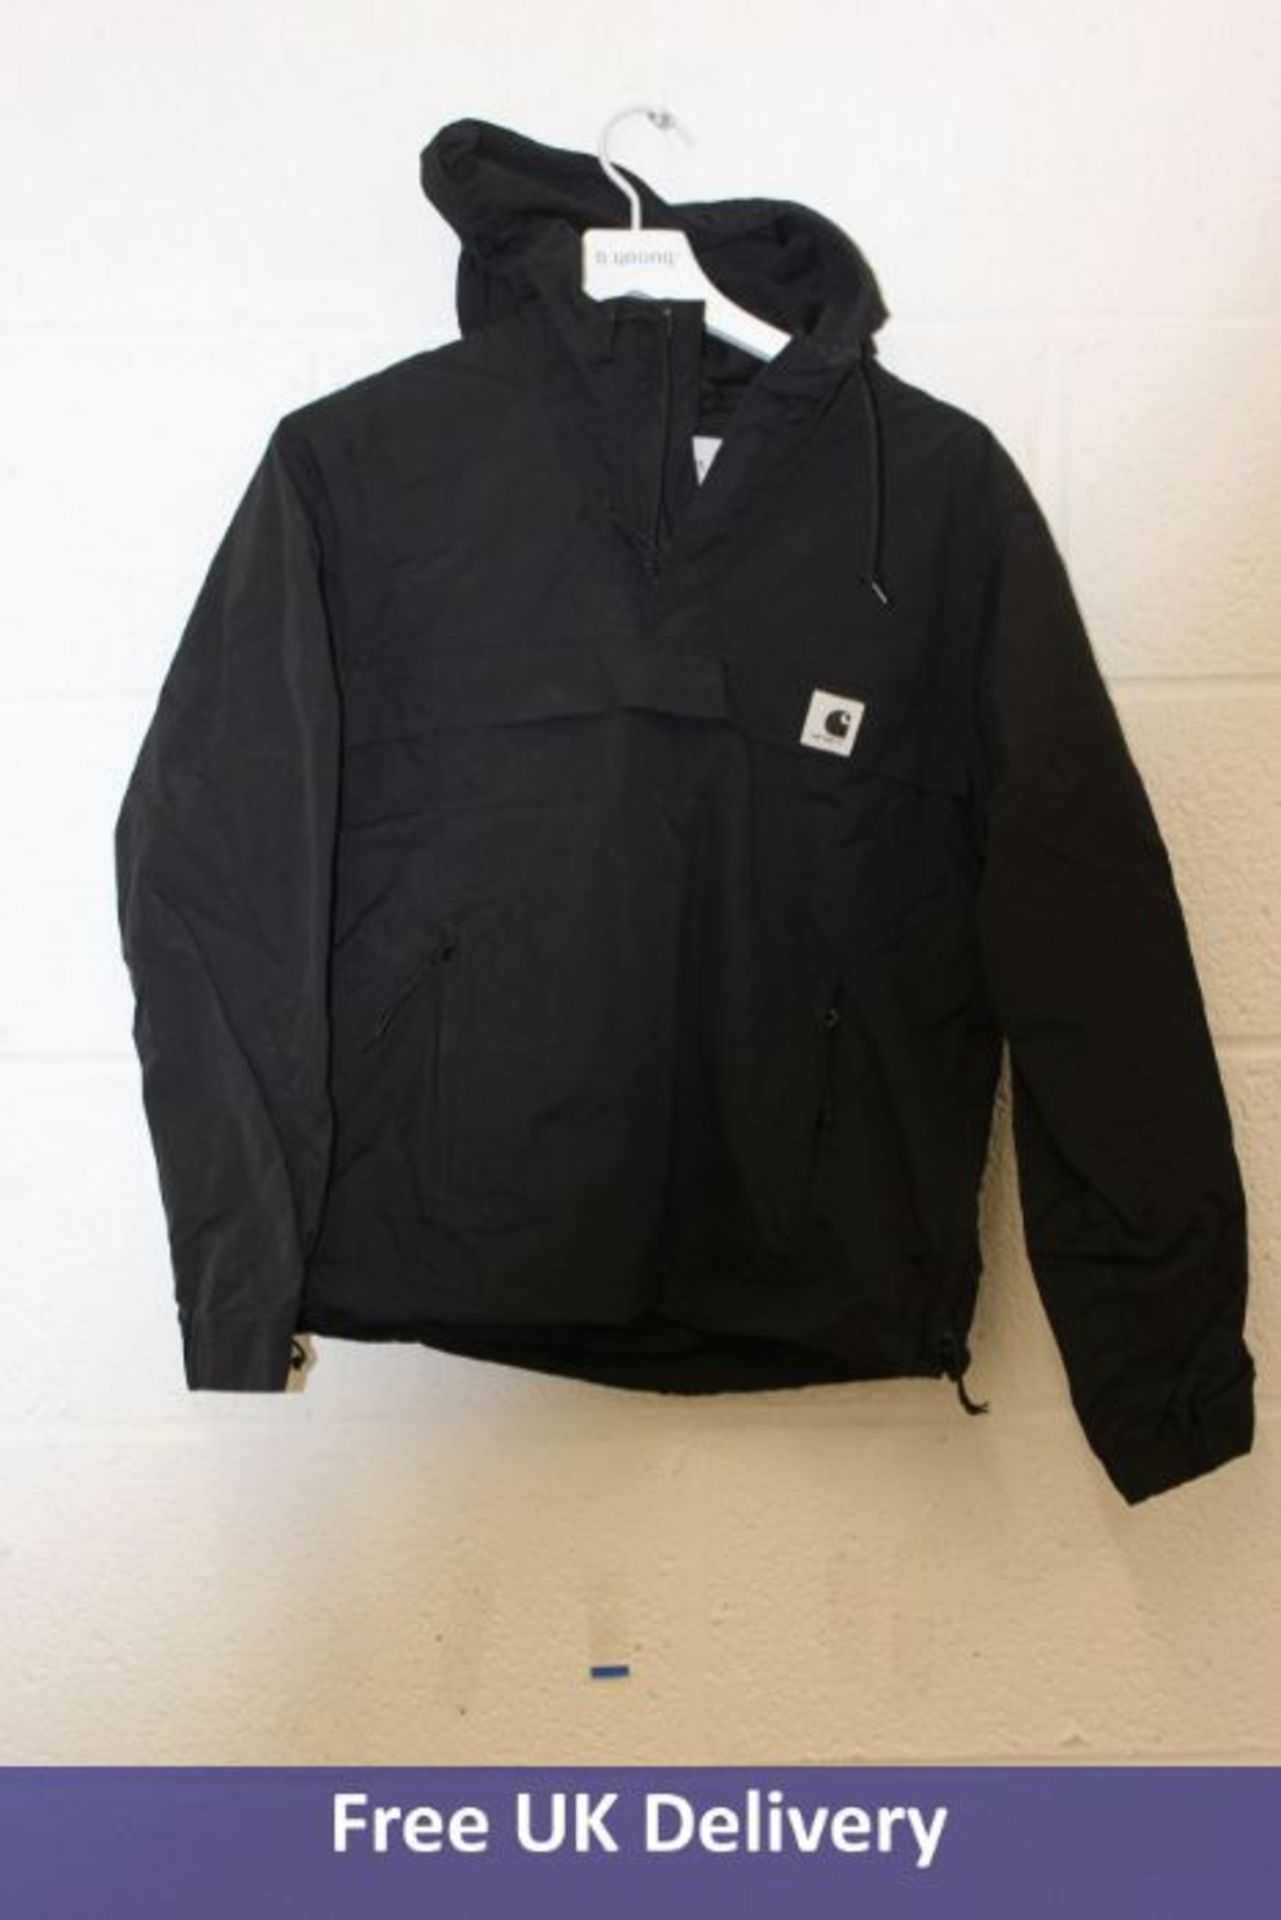 Two items of Carharrt Men's Clothing to include 1x Black Hooded Jacket, S and 1x Heat Wave T-Shirt,